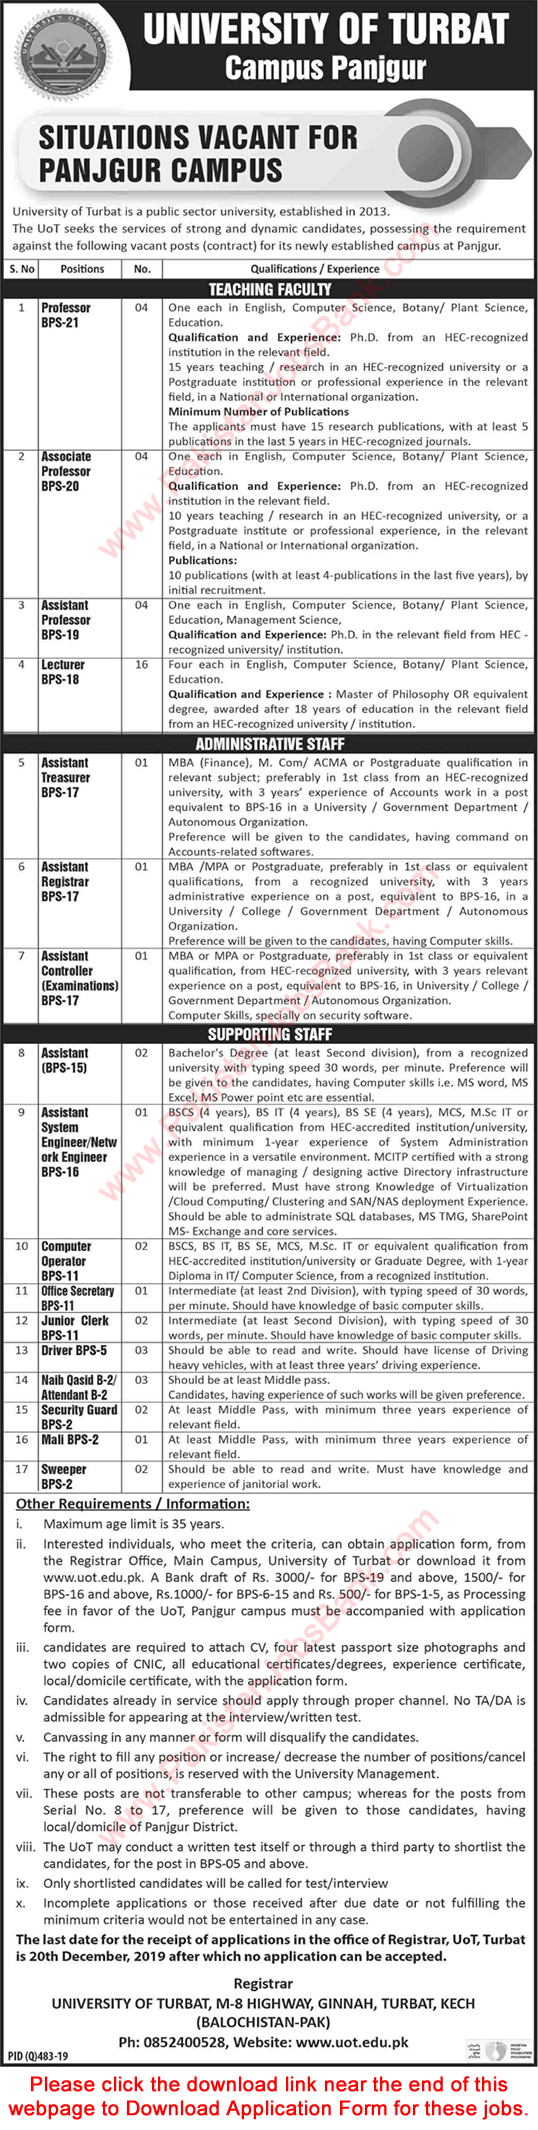 University of Turbat Panjgur Campus Jobs 2019 November Application Form Teaching Faculty & Others Latest